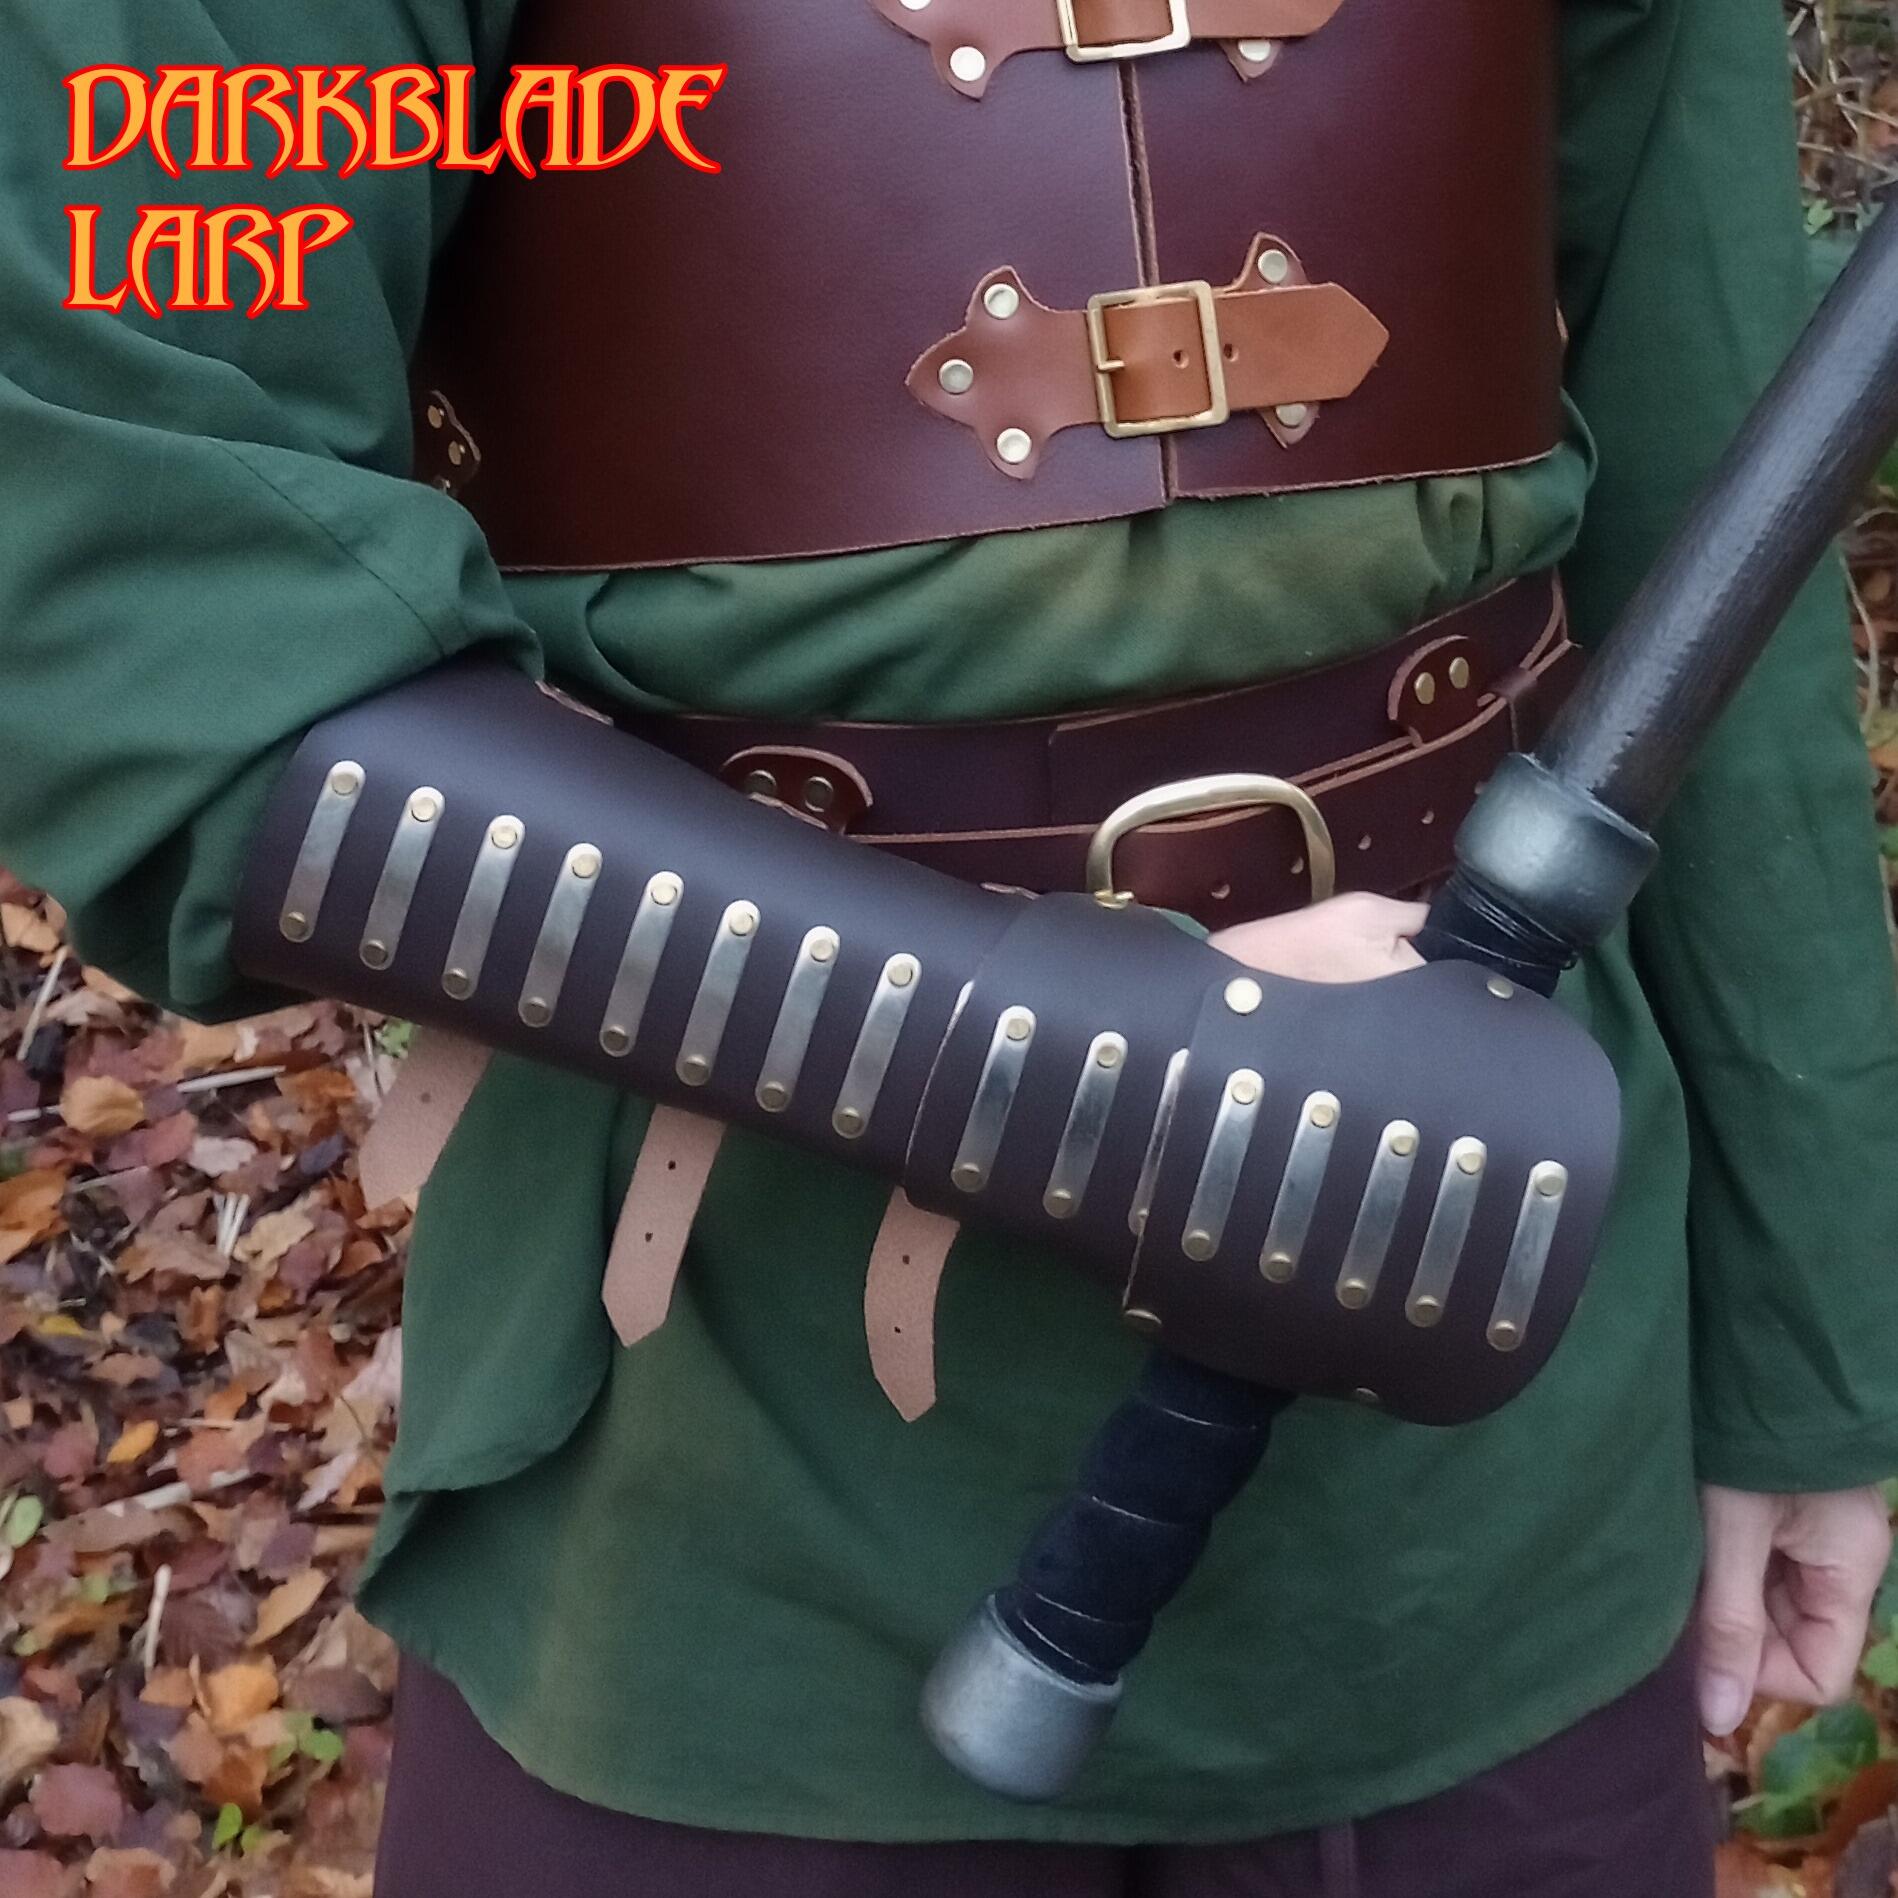 long arm guards with atriculated sections extending over the wrist and hand holding a mace